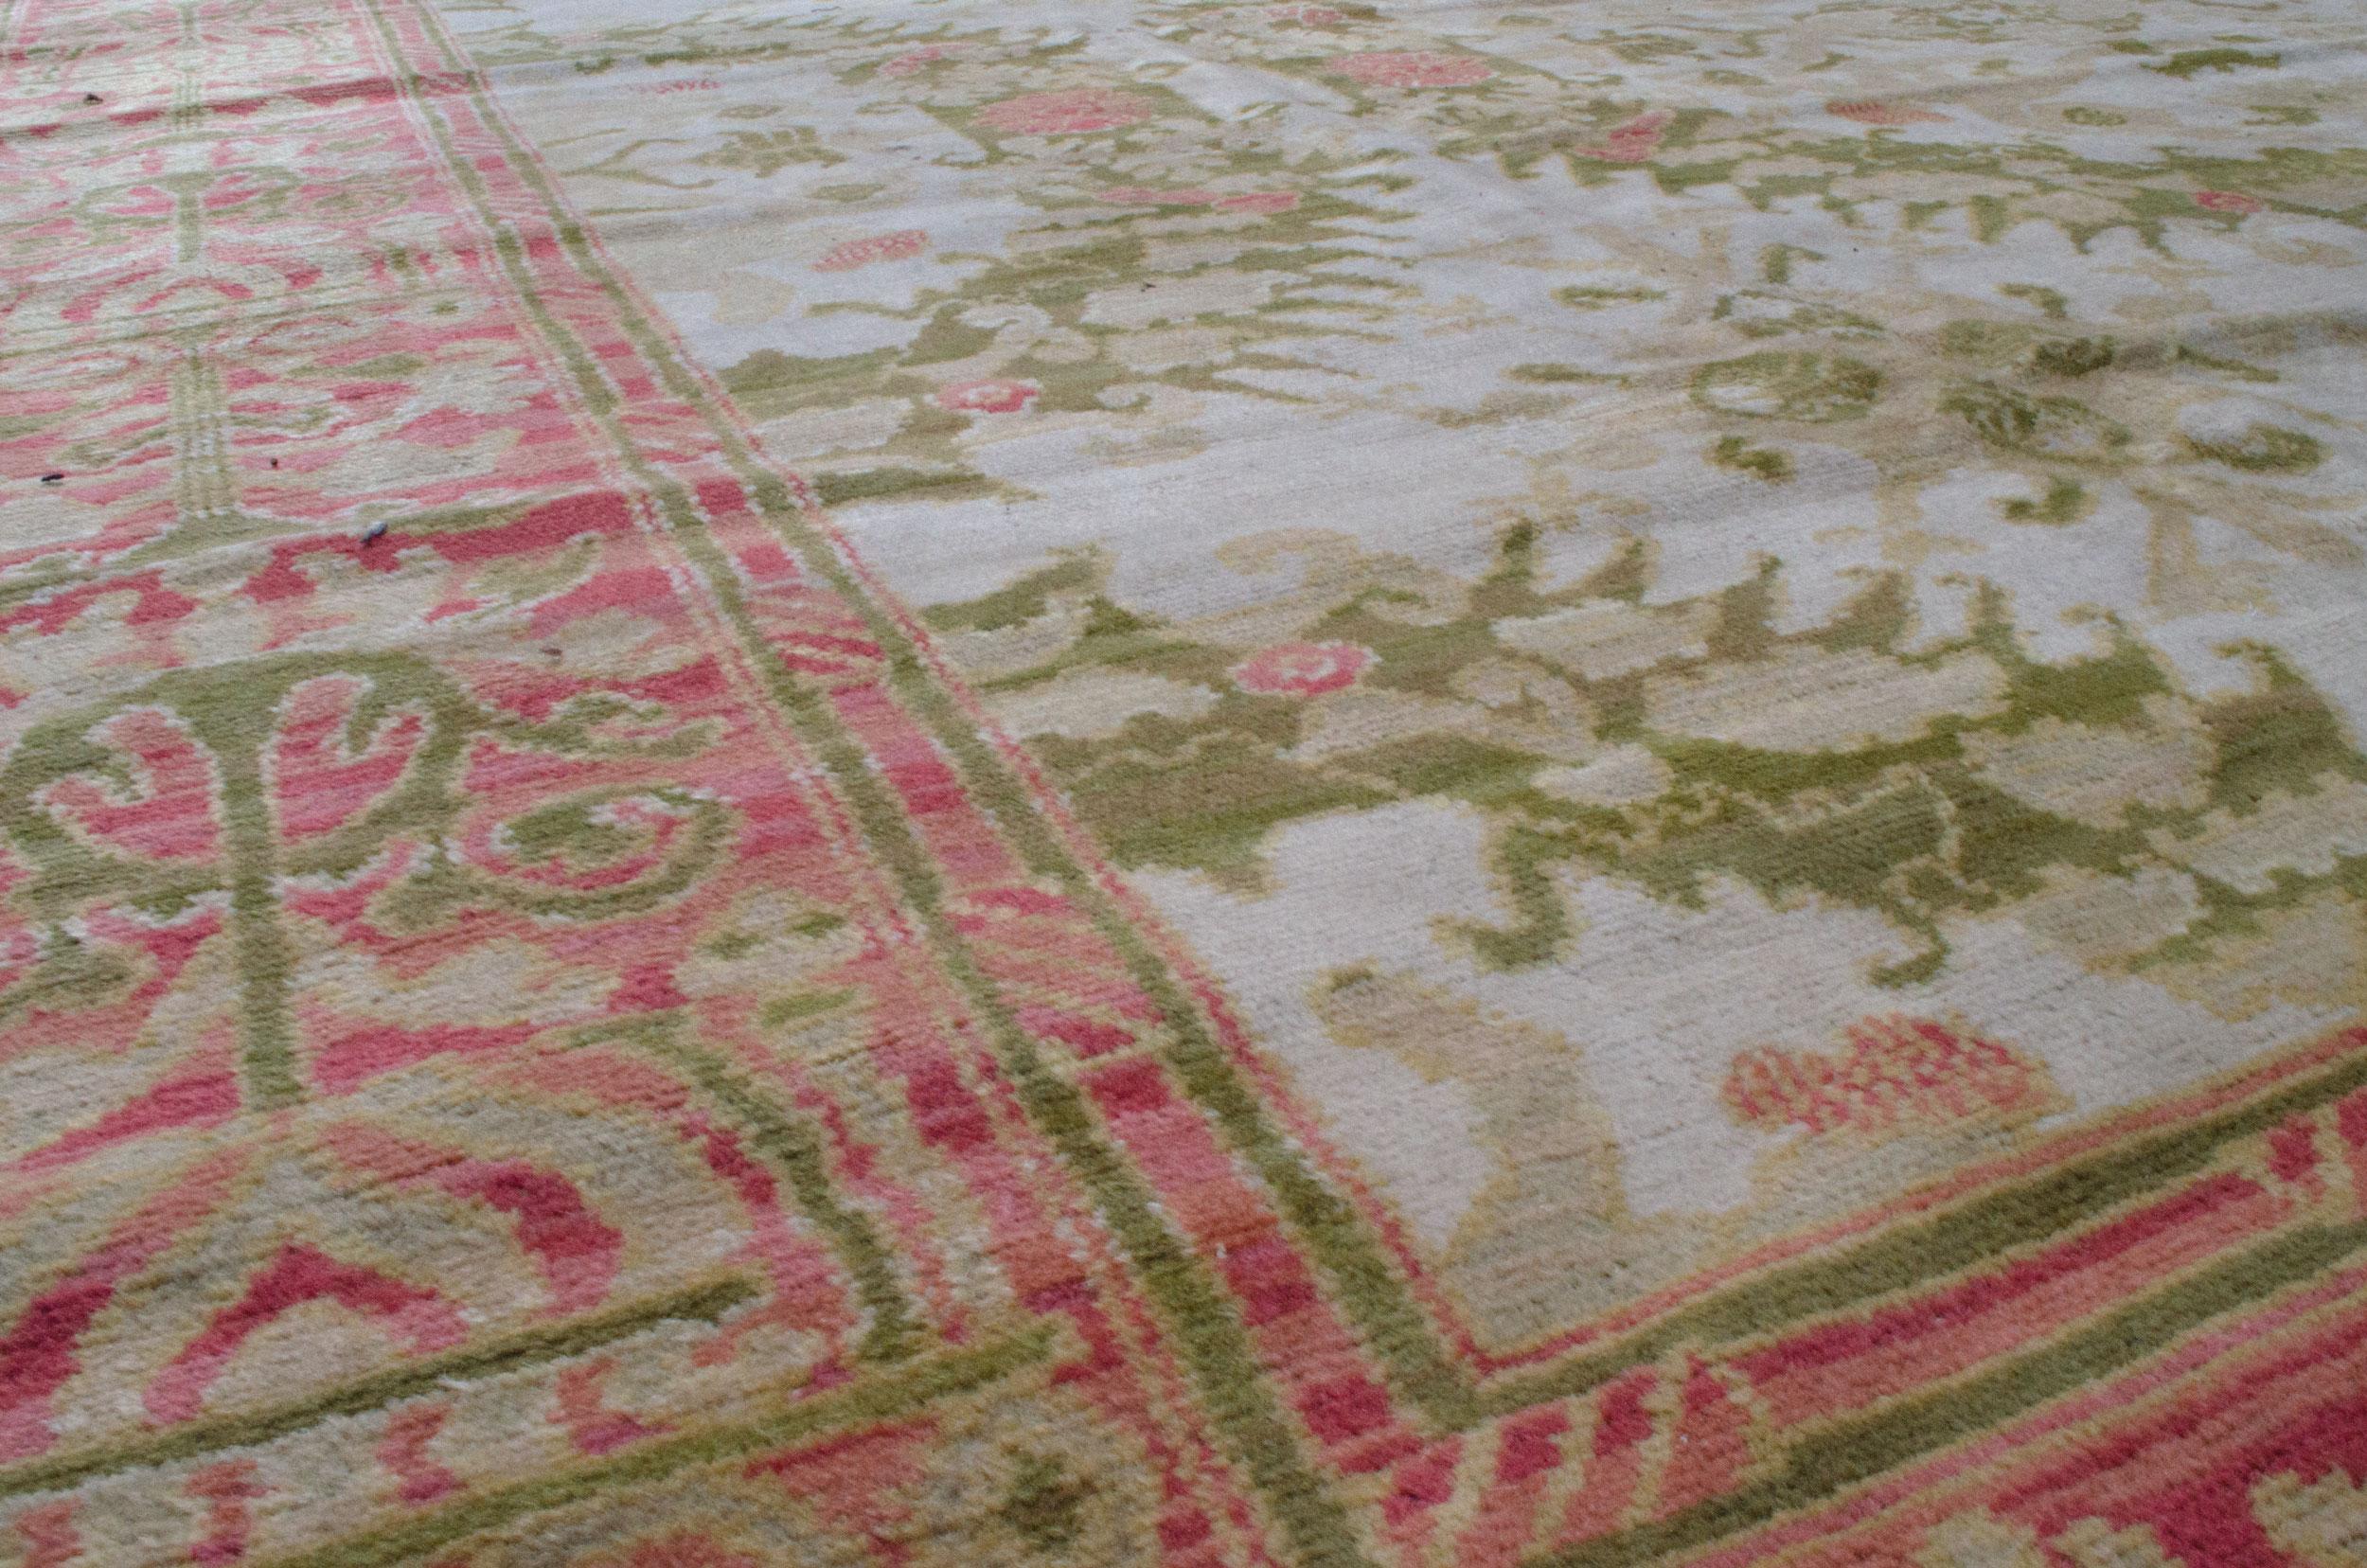 This exquisite early-twentieth-century carpet was produced in Alcaraz, Spain. This carpet is an excellent example of the formal mandate to develop a distinctively Spanish style of artwork. It is an allover design that is in cream and green. The pink